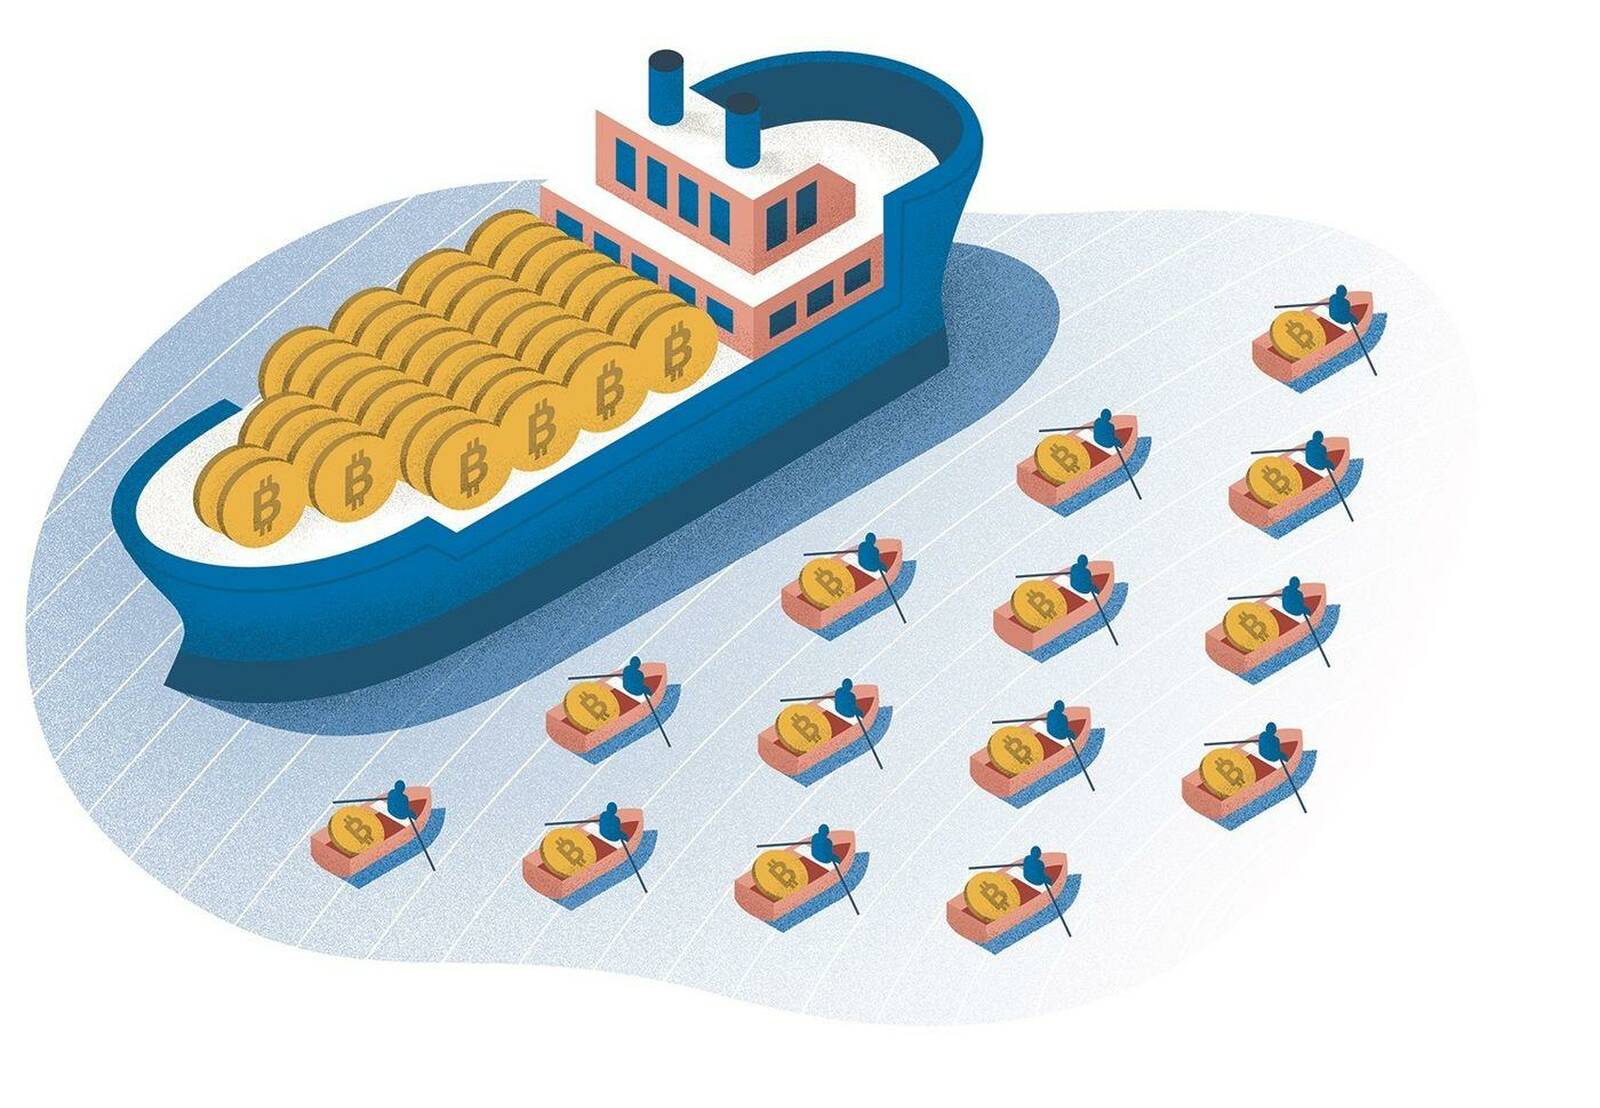 A cryptocurrency tanker is flanked by small boats.